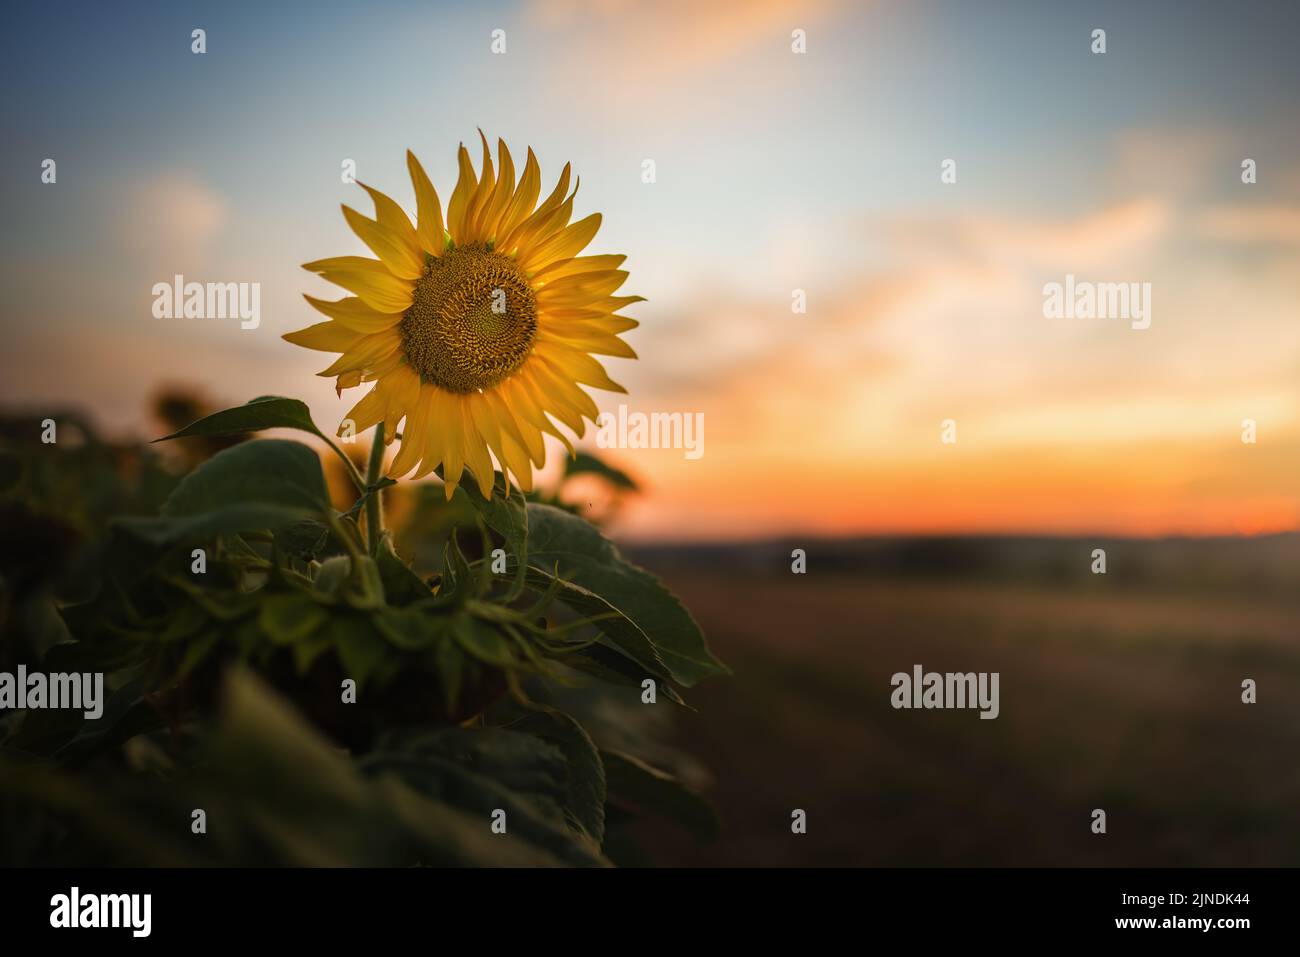 Selectively focused sunflower in a field at dusk. Stock Photo